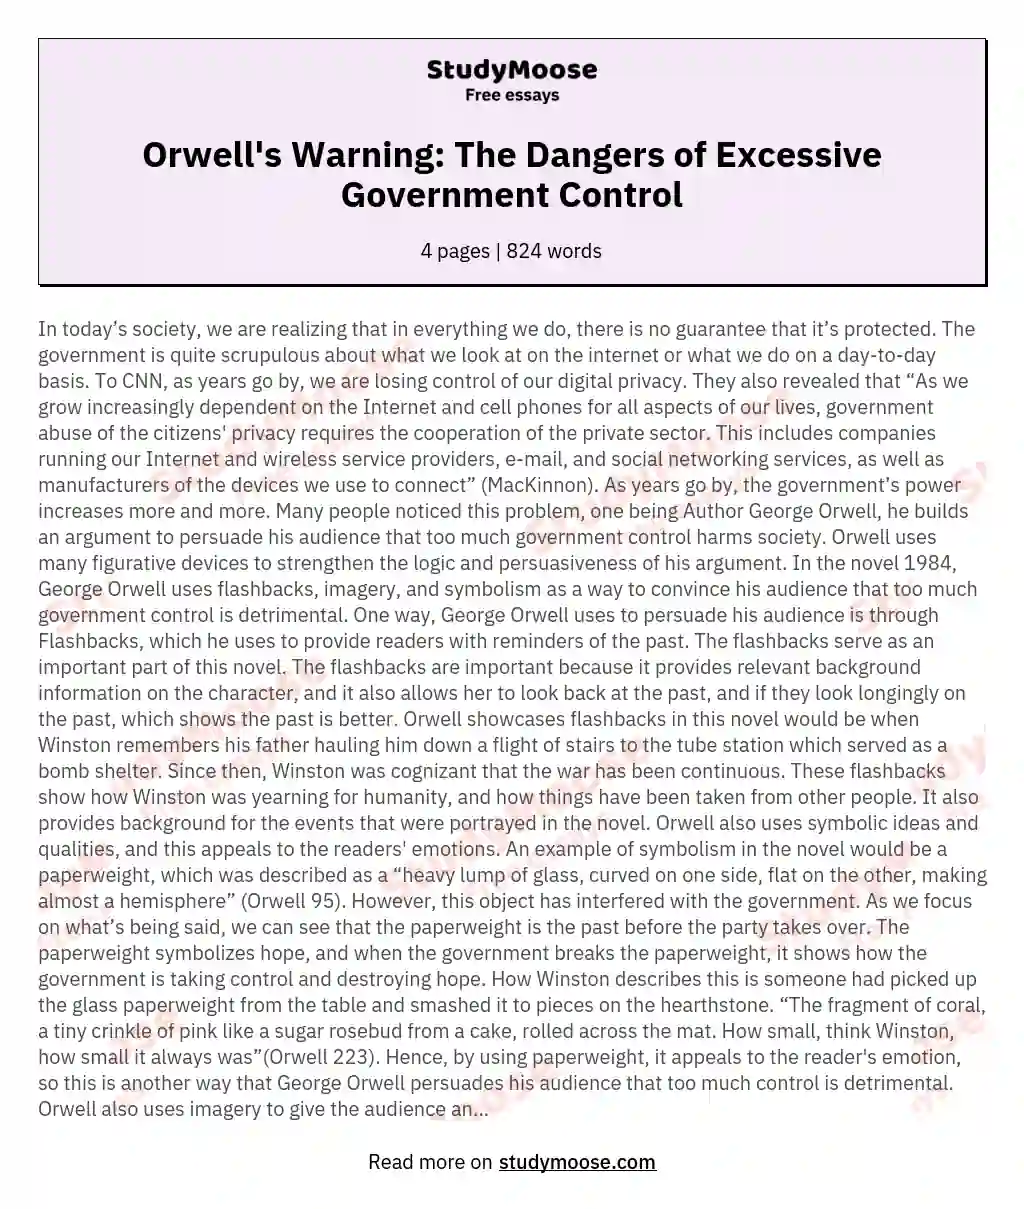 Orwell's Warning: The Dangers of Excessive Government Control essay